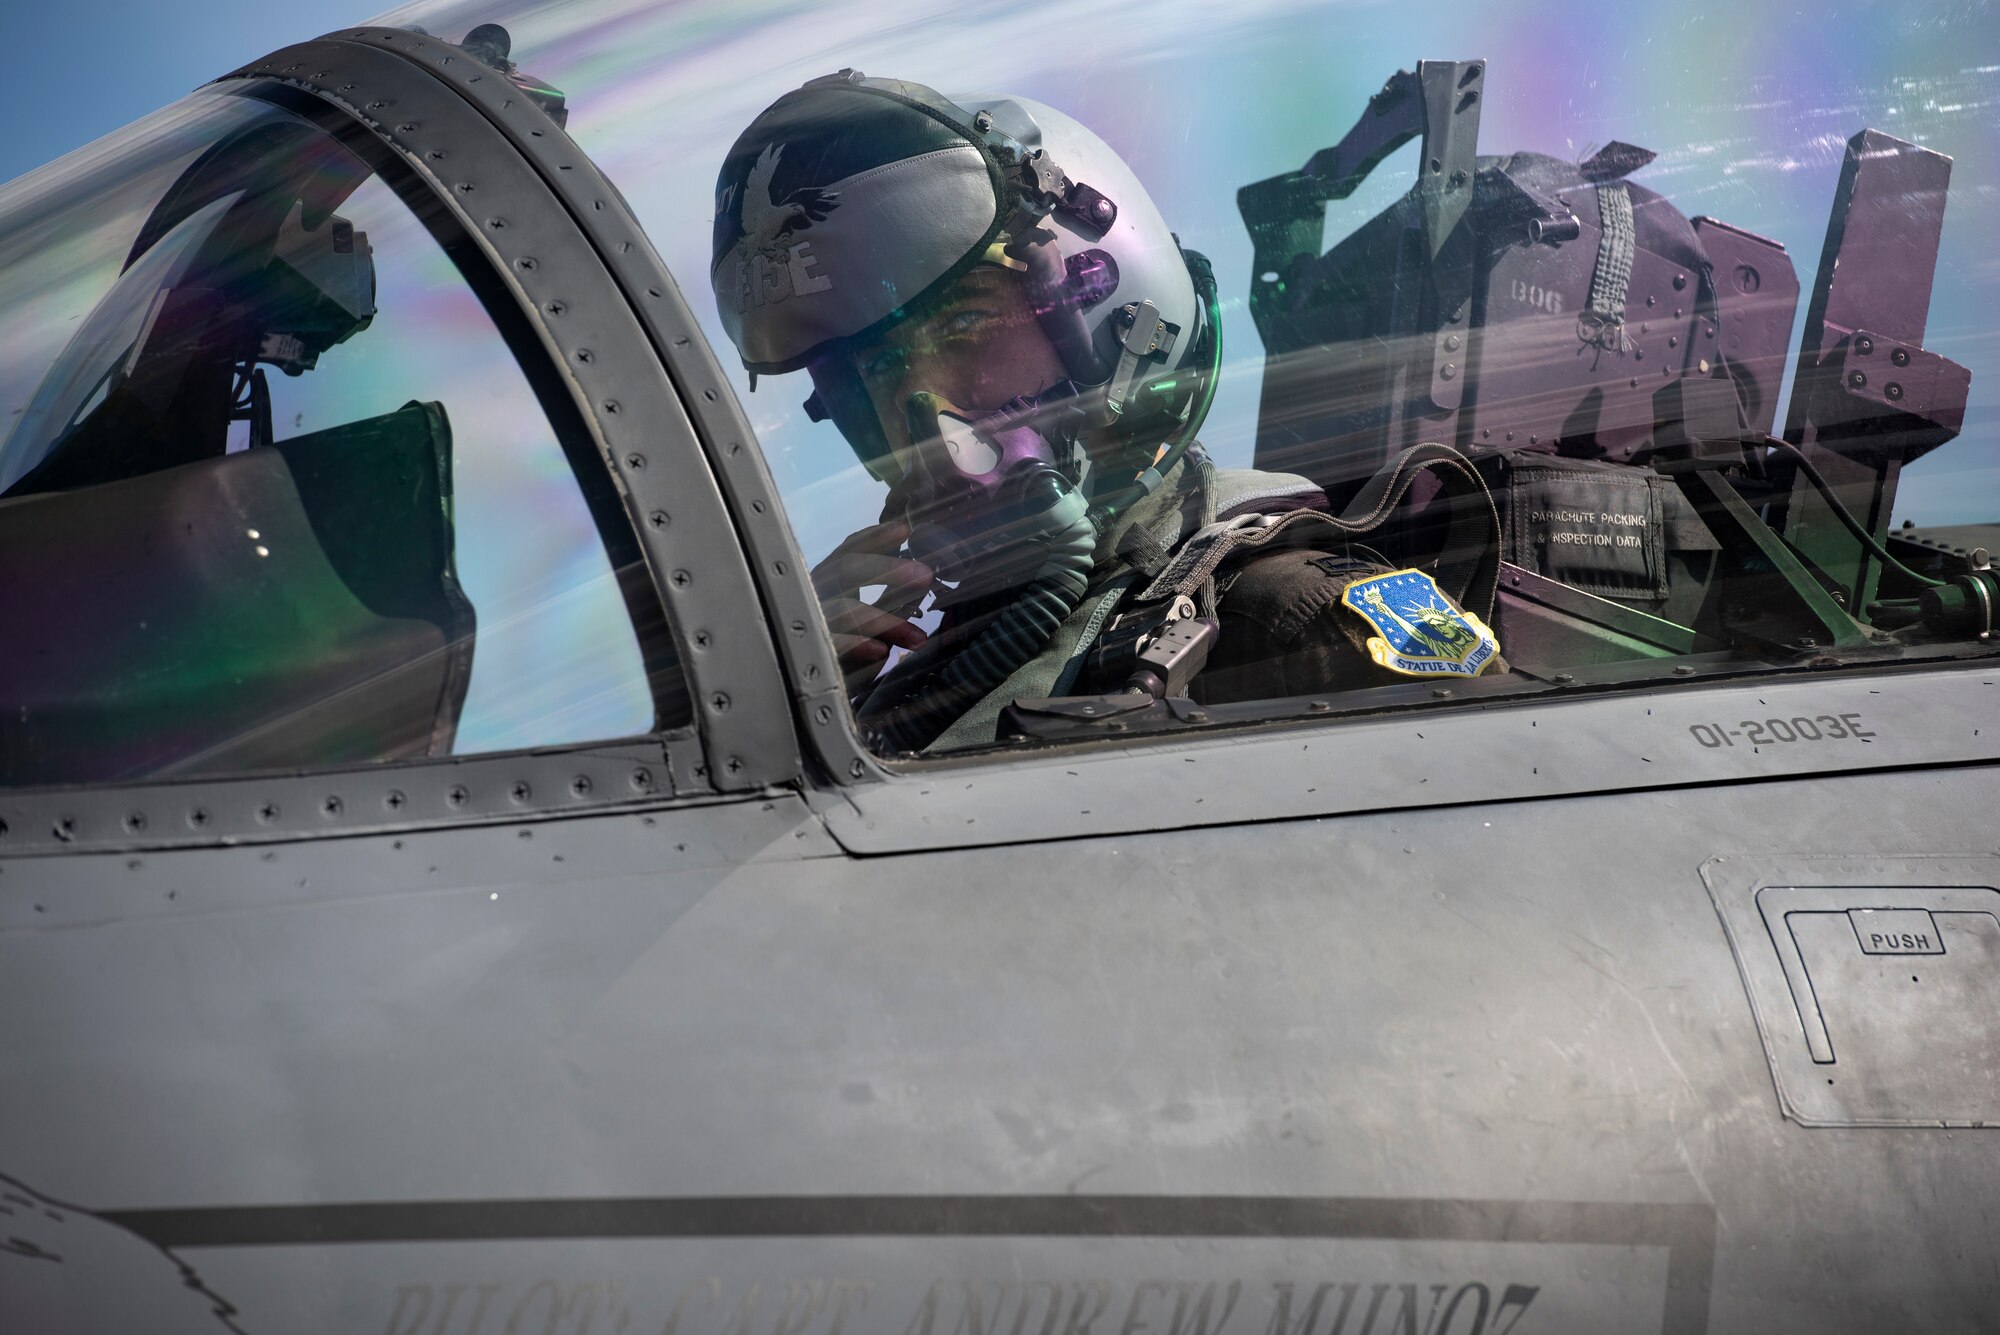 A U.S. Air Force pilot assigned to the 48th Fighter Wing observes ground checks prior to takeoff in support of exercise Point Blank 20-4 at Royal Air Force Lakenheath, England, Sept. 10, 2020.  Exercises like Point Blank increase interoperability and collective readiness with other NATO forces, deter potential adversaries and ensure the skies above the European theater remain sovereign. (U.S. Air Force photo by Airman 1st Class Jessi Monte)